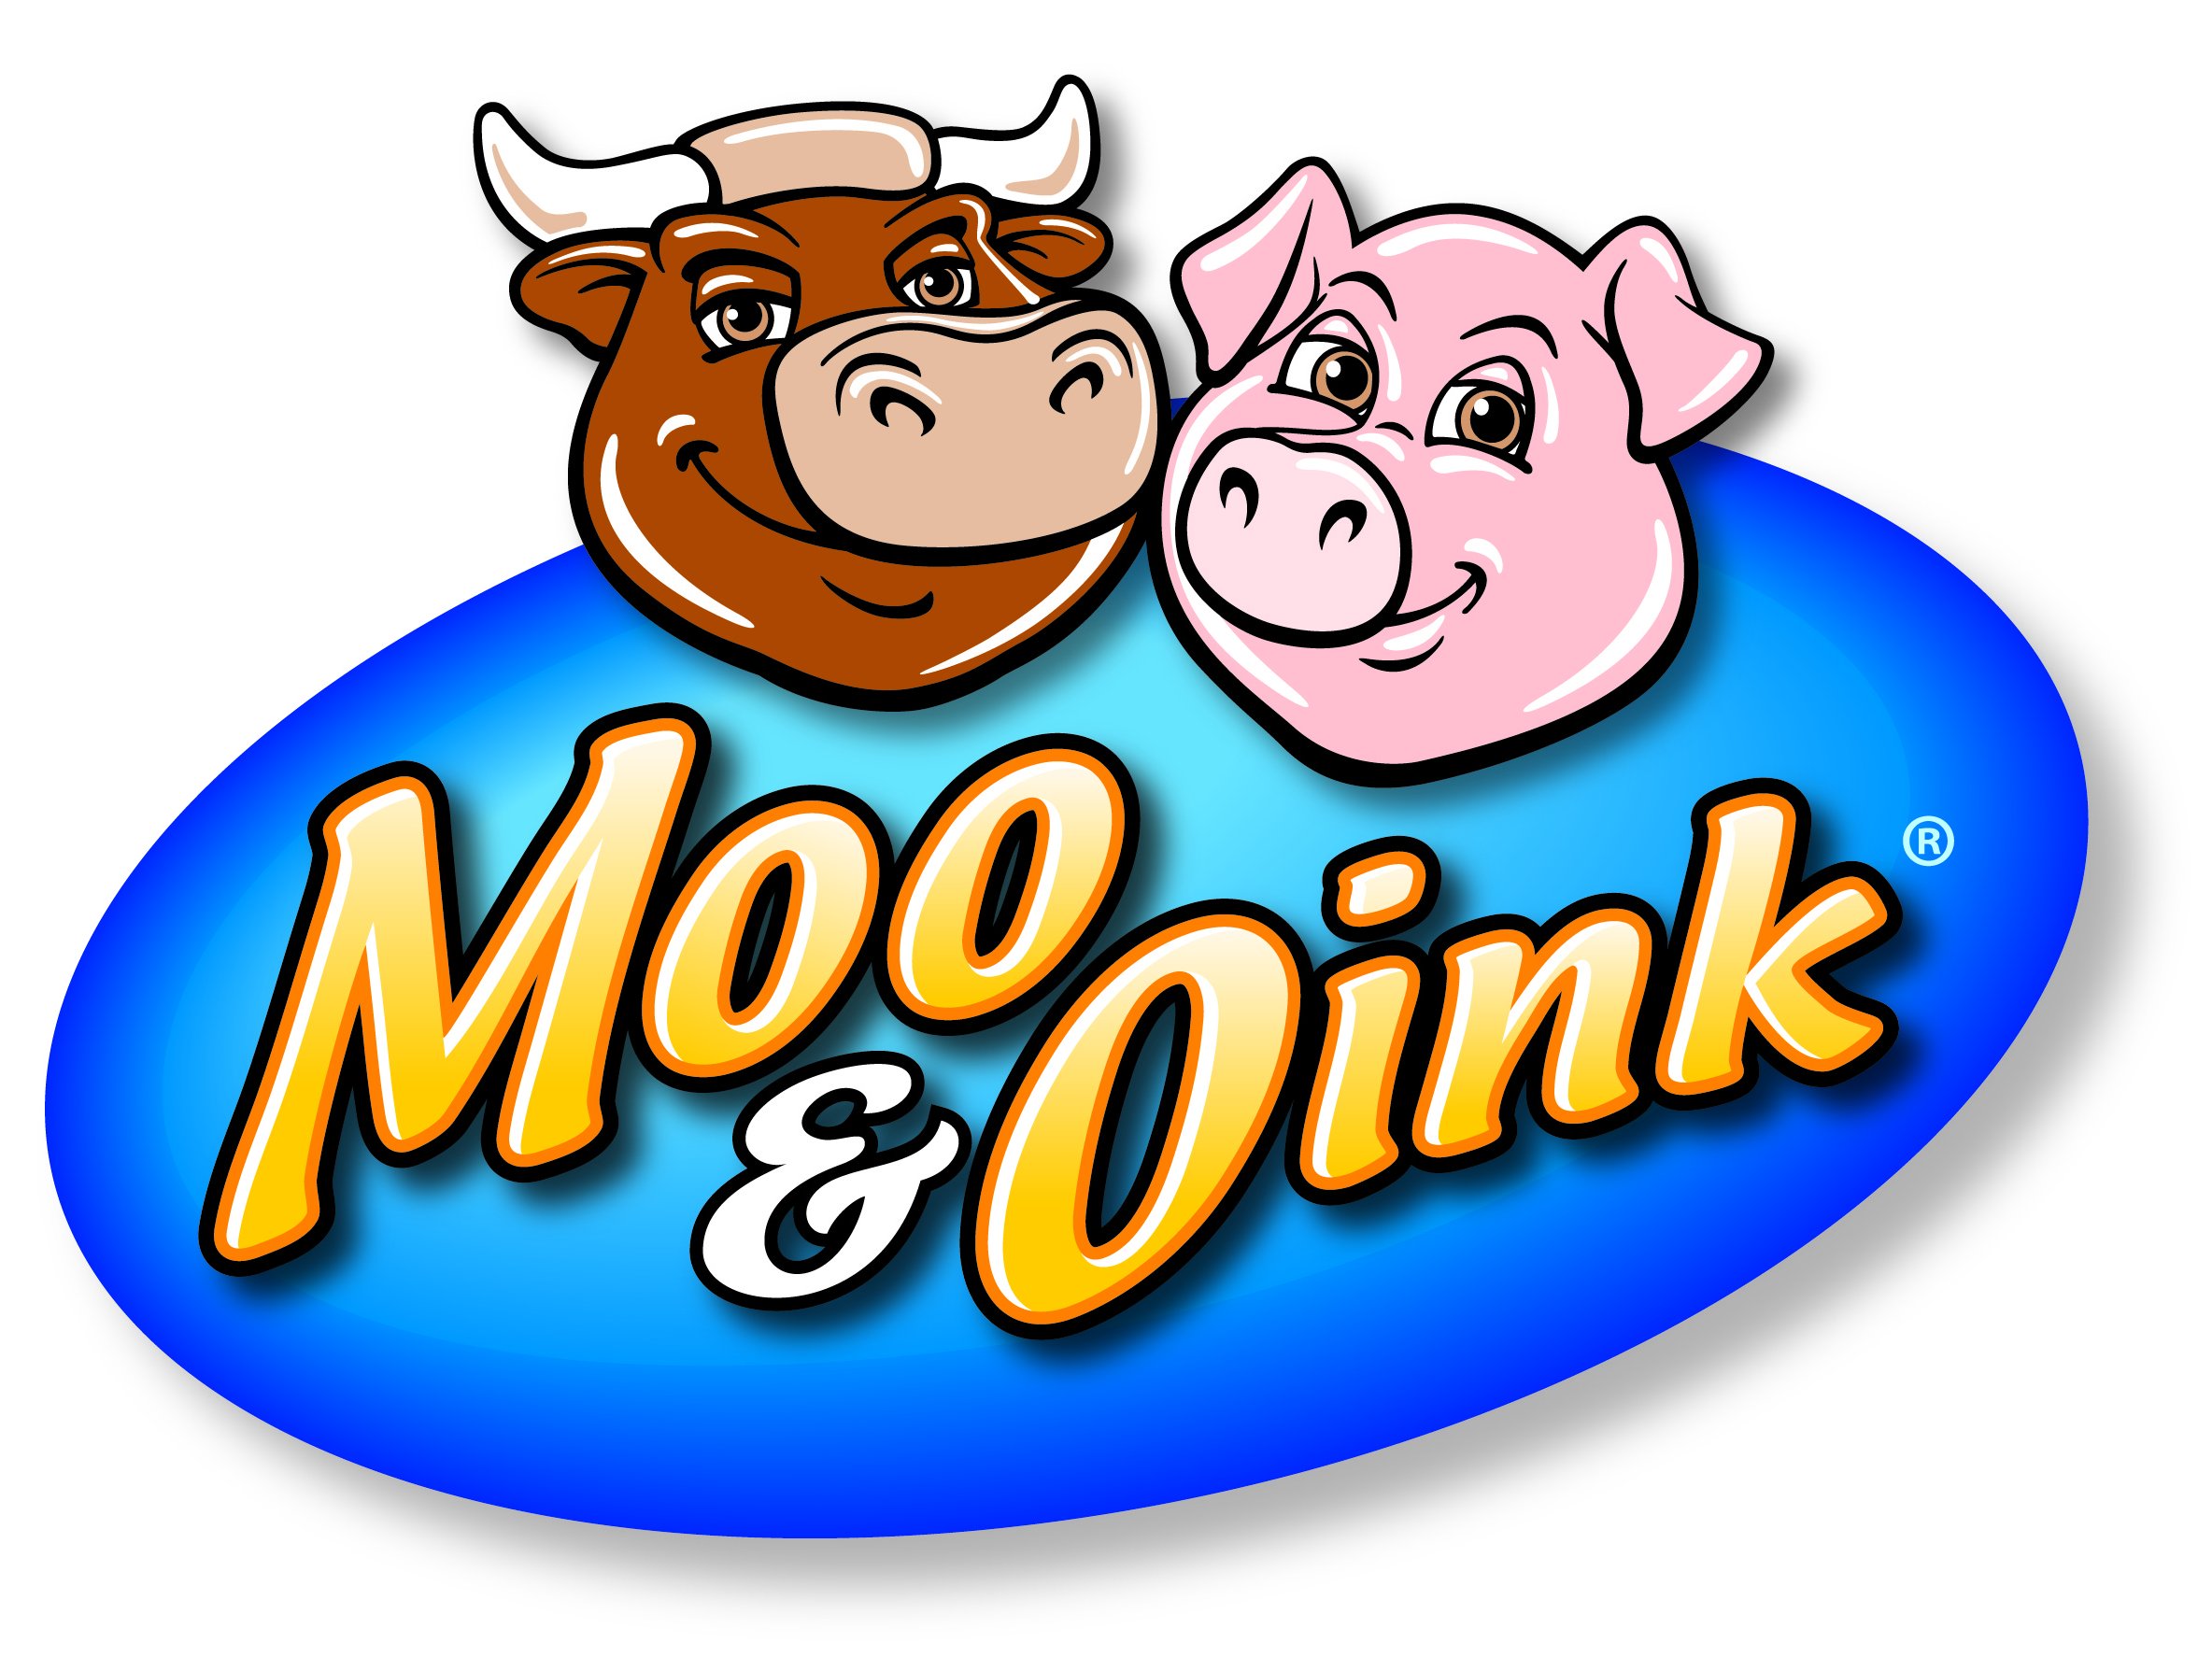 Moo & Oink is back in sweet home Chicago